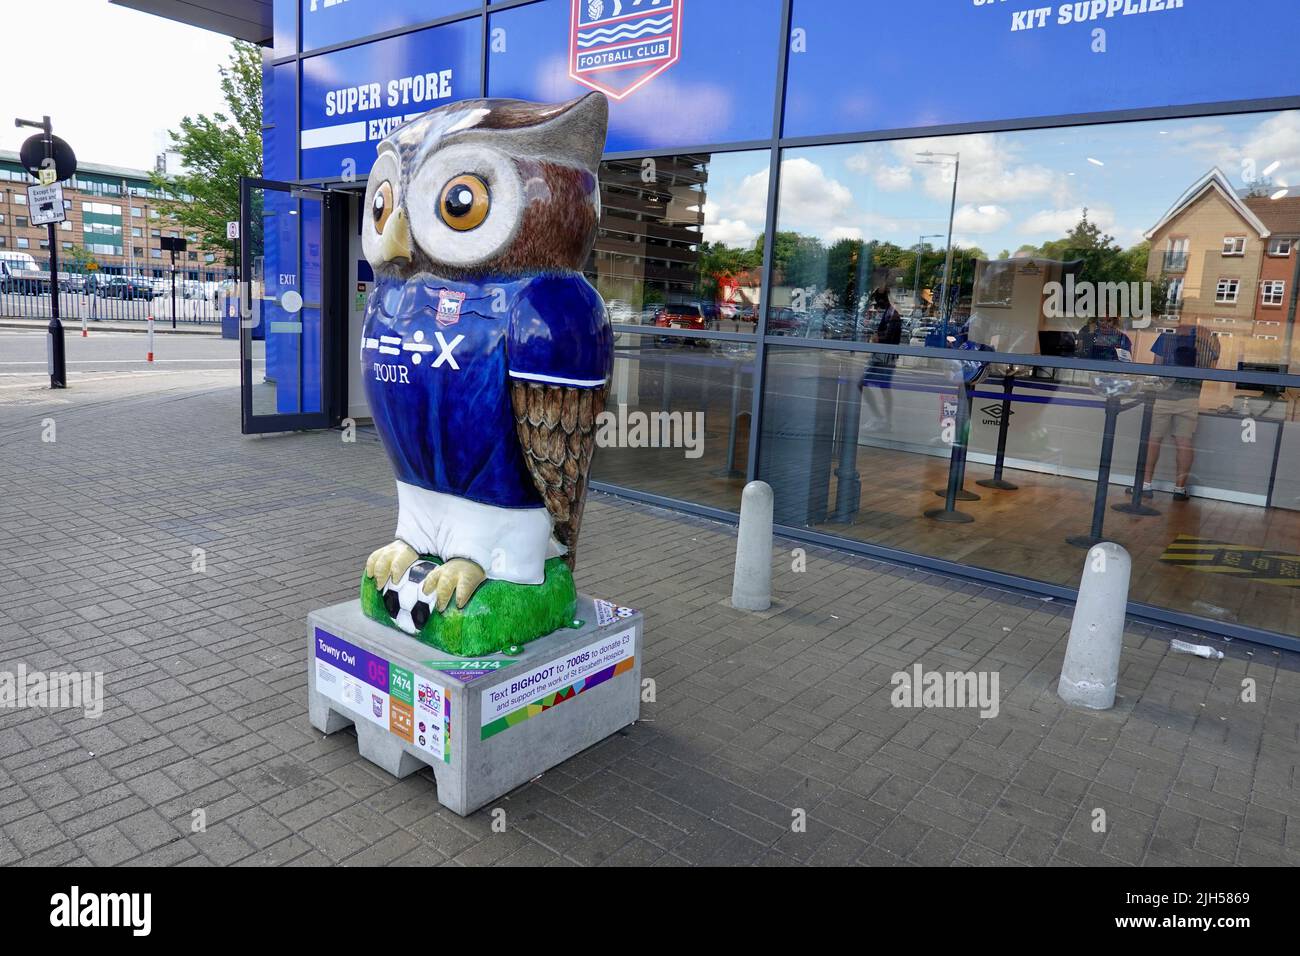 Ipswich, Suffolk, UK - 15 July 2022: The Big Hoot owl trail in aid of St Elizabeth hospice. Towny owl by Sarah Edwards at ITFC putside the club shop. Stock Photo